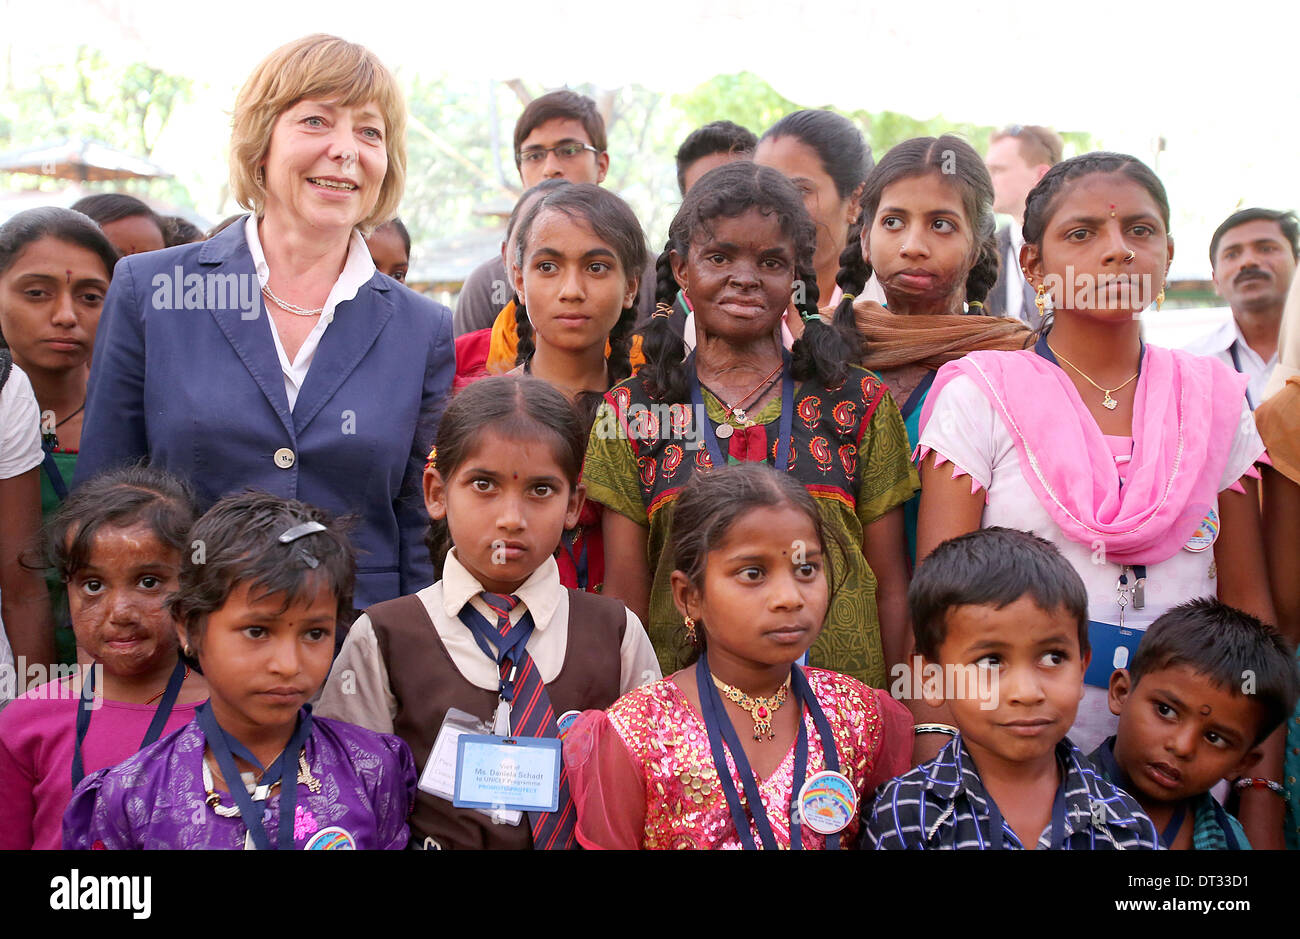 Bangalore, India. 07th Feb, 2014. Partner of German President Gauck, Daniela Schadt, visits the UNICEF facility Cubbon Park in Bangalore, India, 07 February 2014. Cubbon Park supervises several projects including one of the German Children's emergency relief to support HIV-infected children and a project against child marriage and trafficking. The German head of state is on a six-day state visit to India. Photo: WOLFGANG KUMM/dpa/Alamy Live News Stock Photo